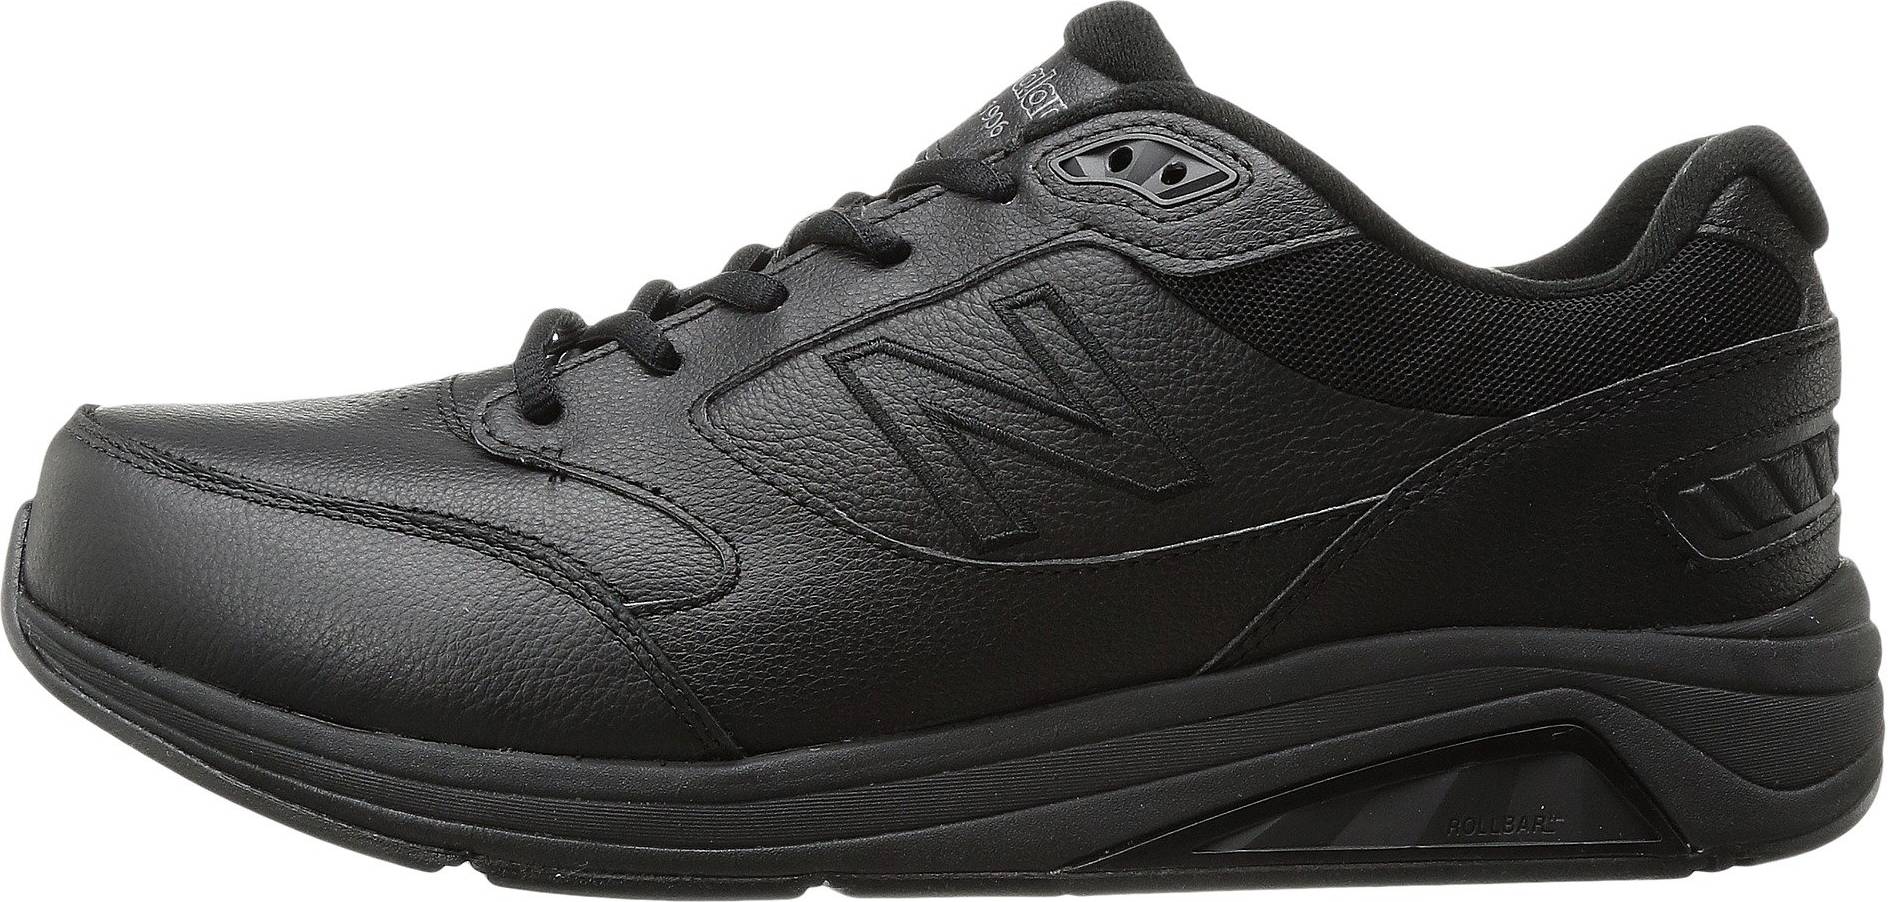 Only £81 + Review of New Balance 928 v3 